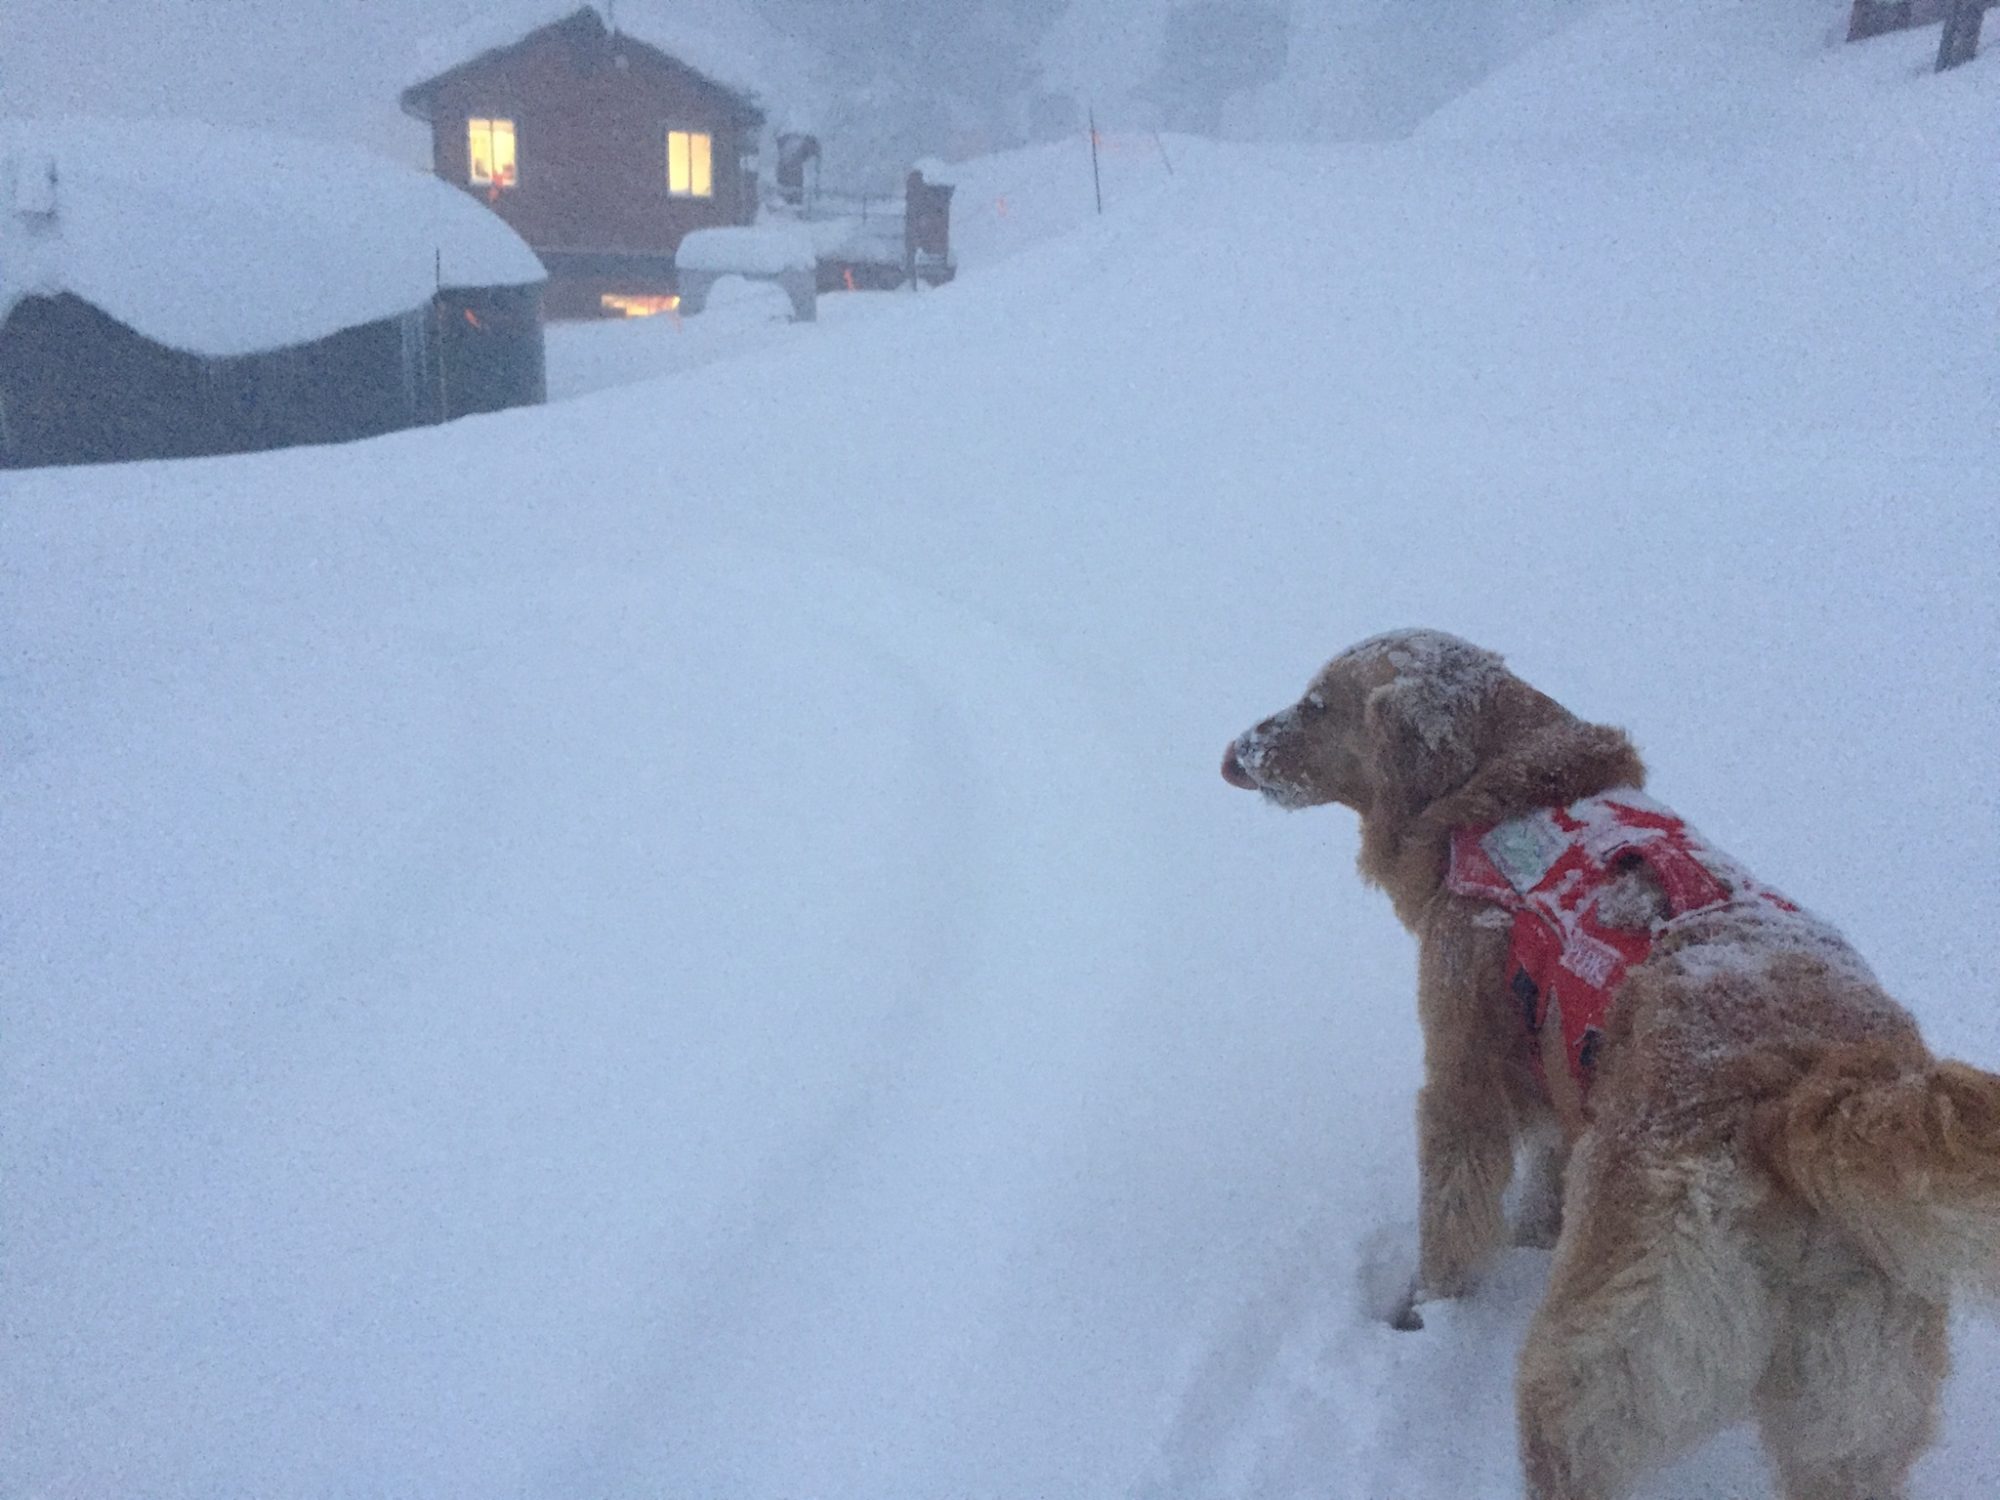 A patrol dog is waiting to go to work in Heavenly. Photo: Elisabeth Biebl. Heavenly, Northstar, and Kirkwood Resorts Announce Extended Ski Season.